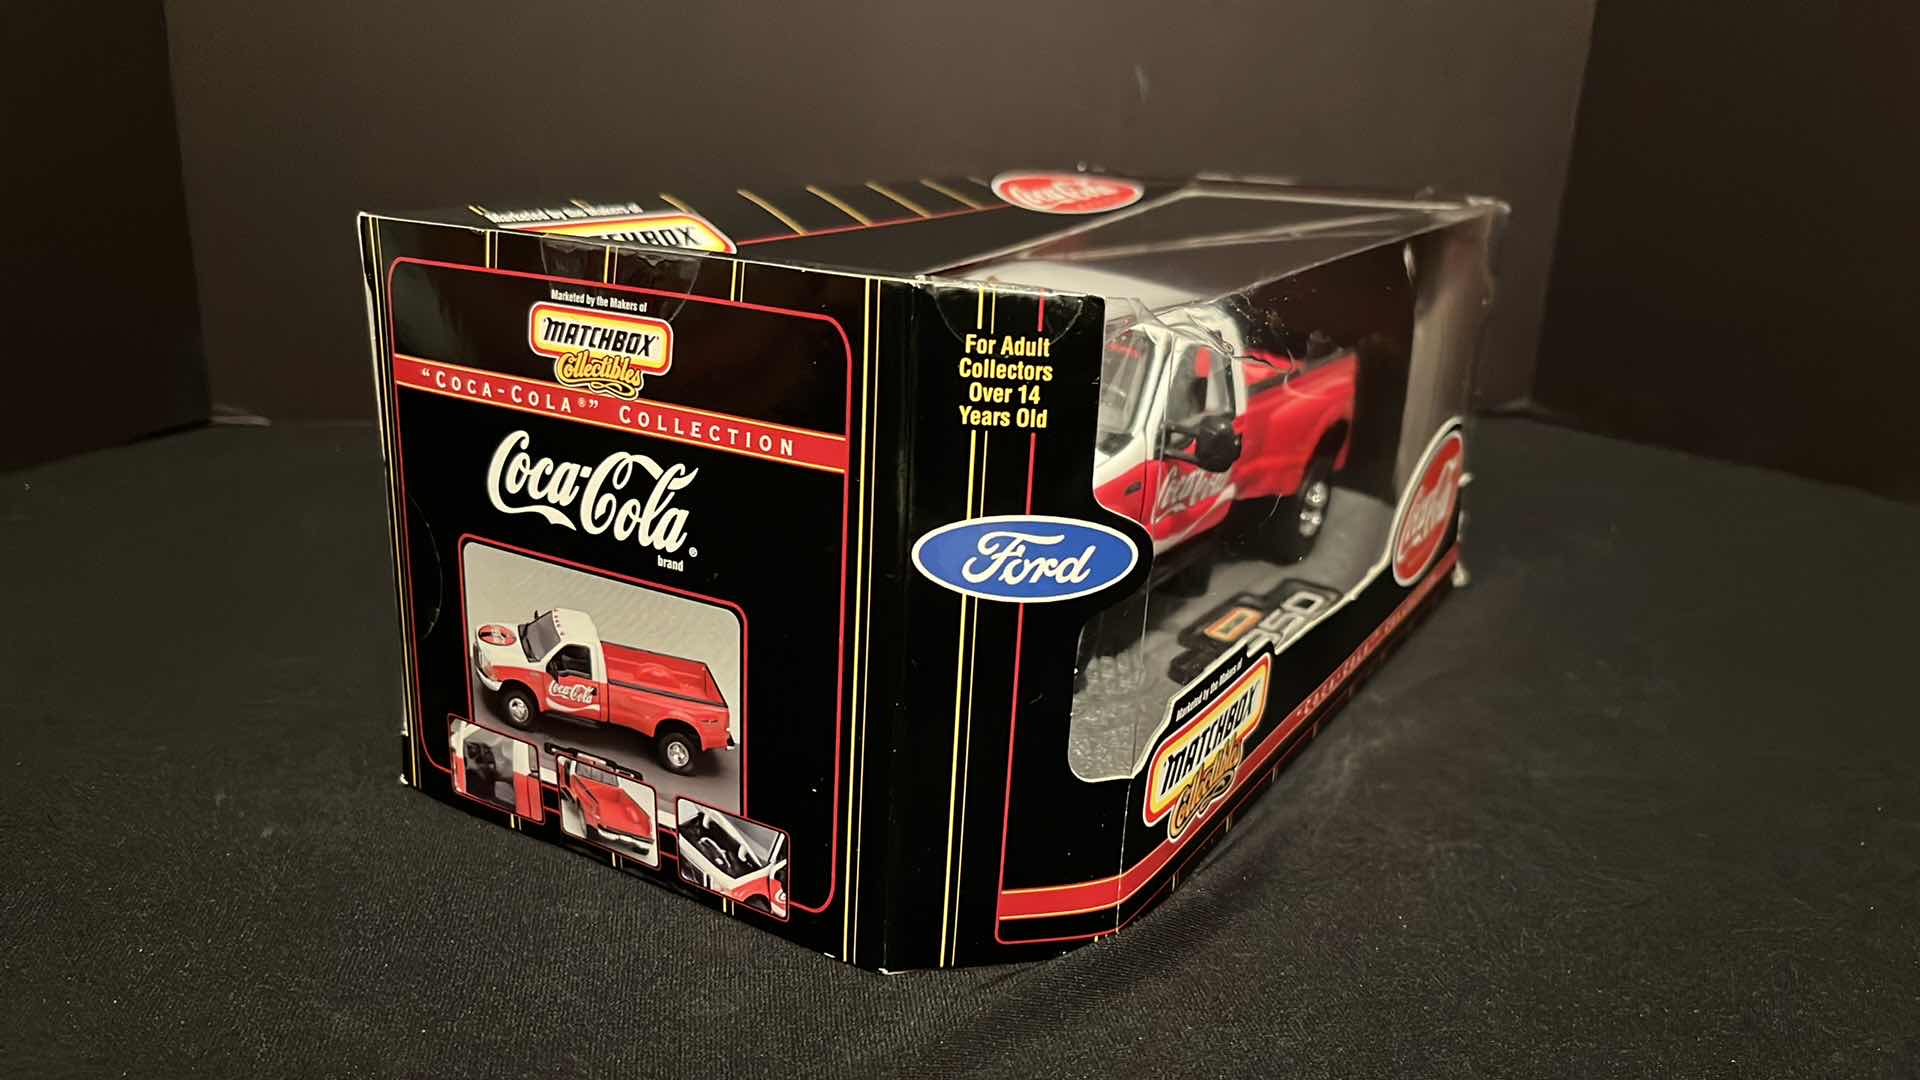 Photo 3 of MATCHBOX COLLECTIBLES COCA-COLA COLLECTION DIE-CAST METAL 1999 GORD F-350 SUPER DUTY PICK UP TRUCK, 1999